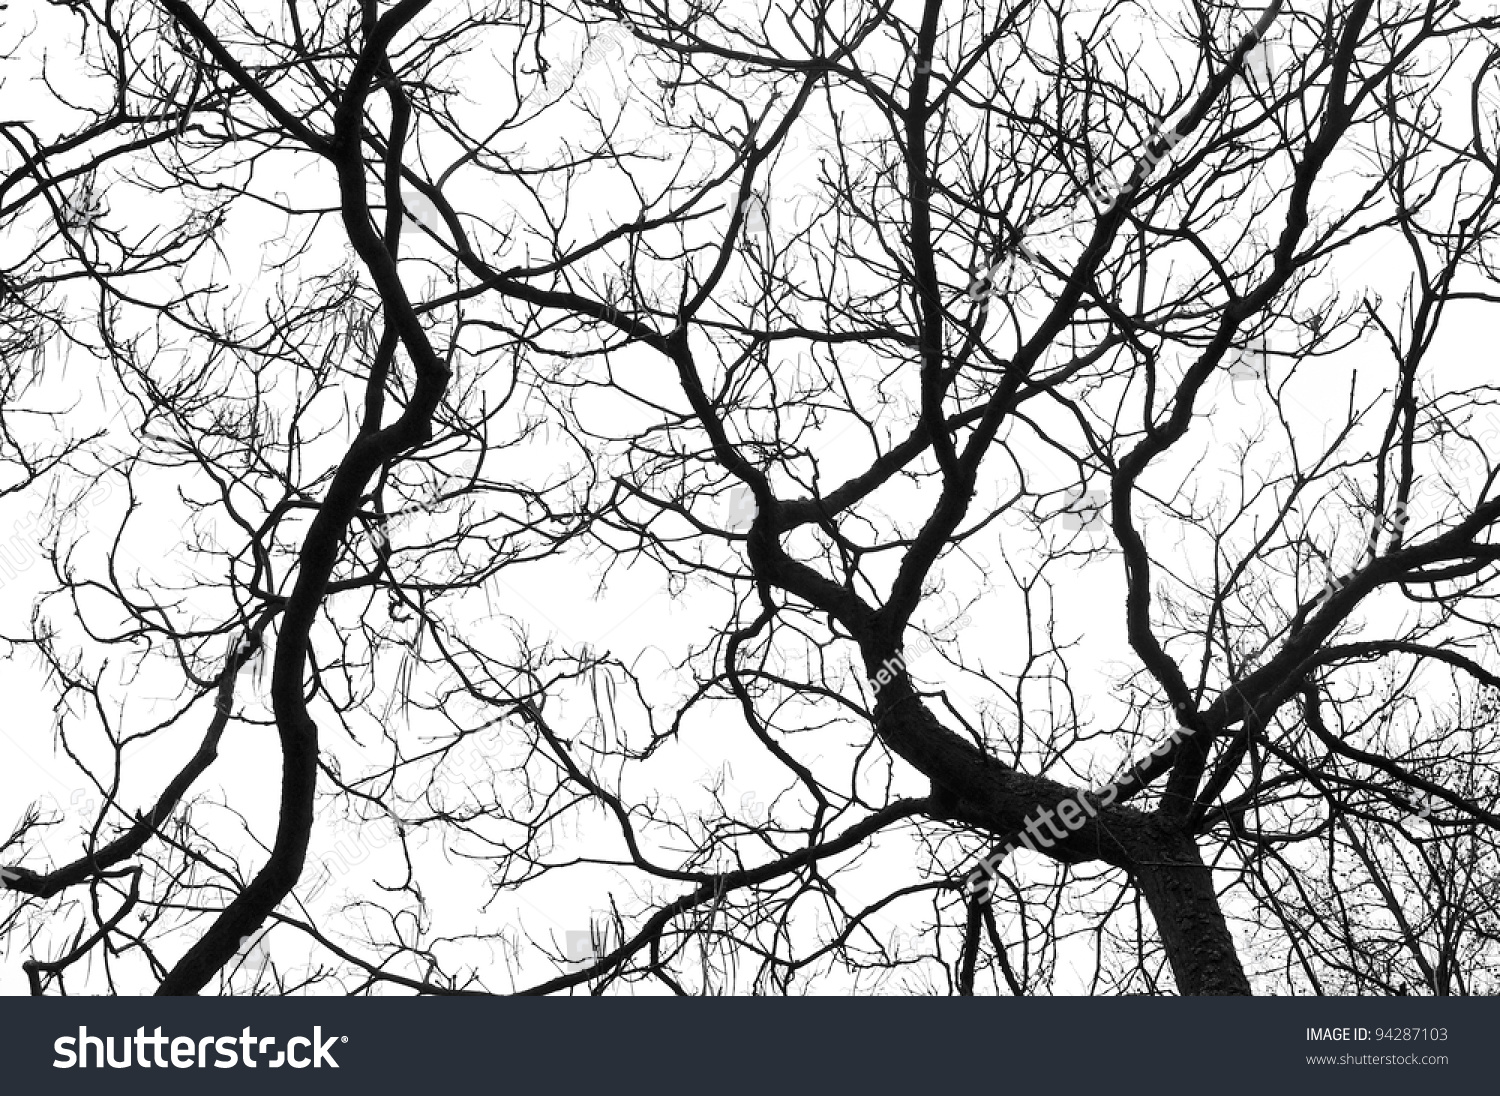 Tree Branches Isolated On White Background Stock Photo 94287103